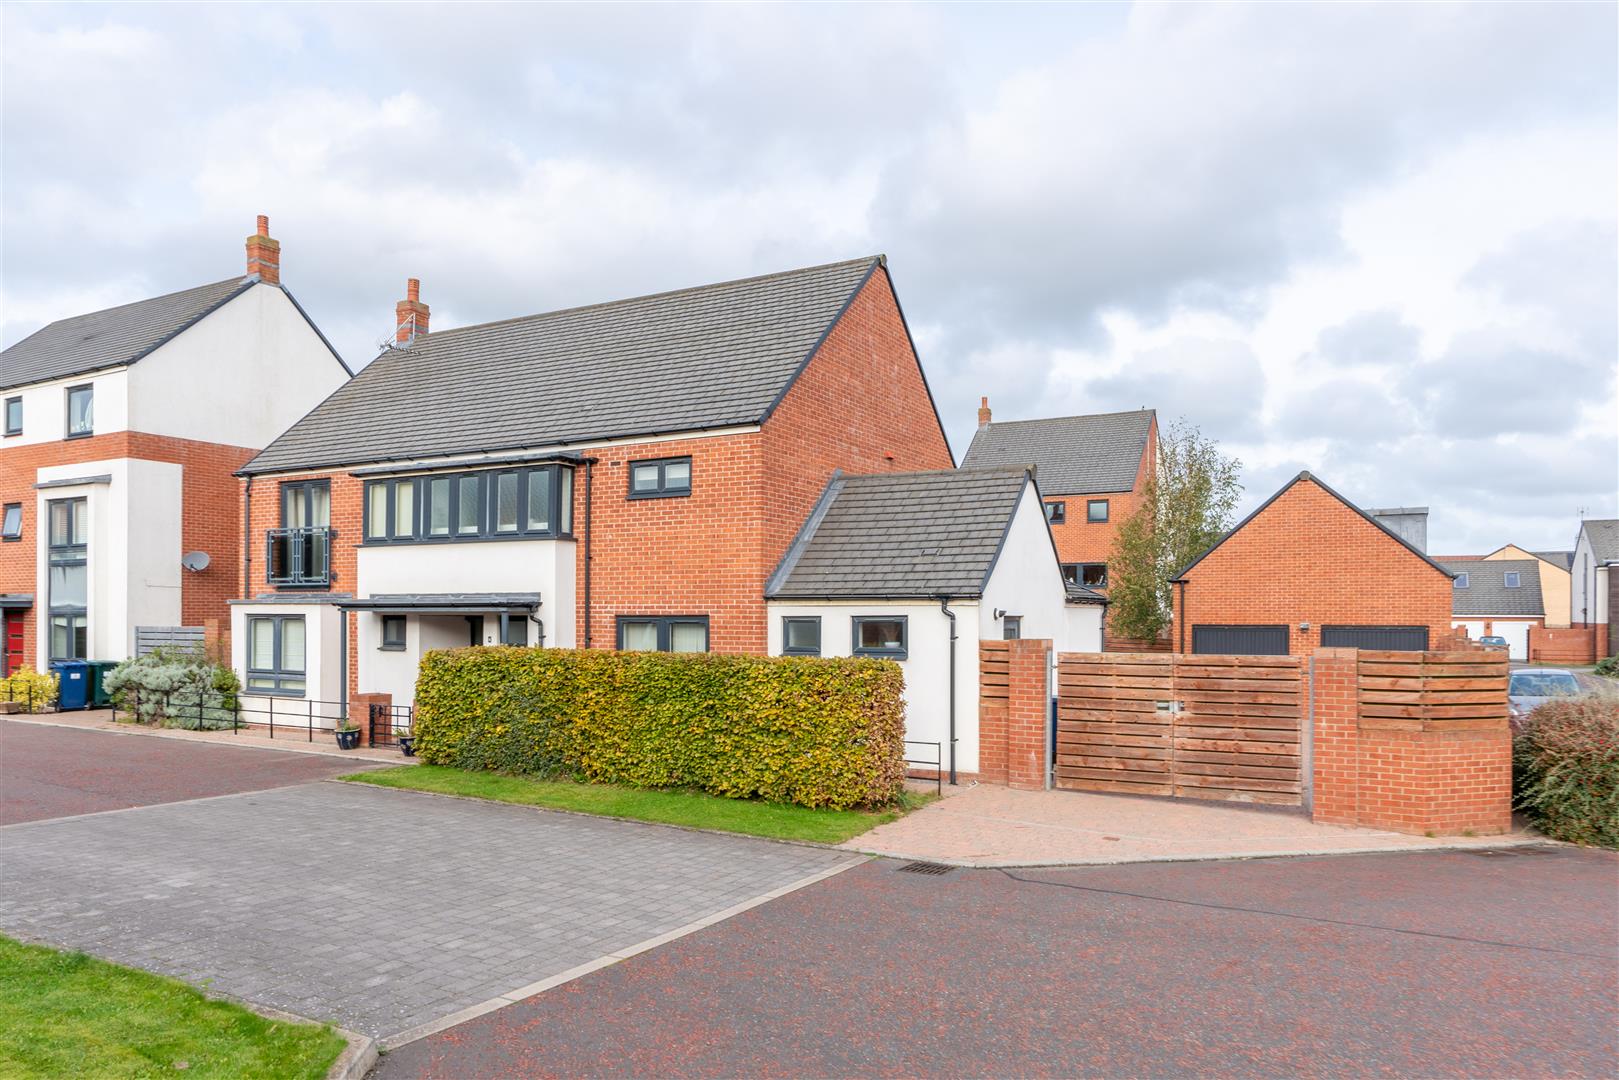 4 bed detached house to rent in Learmouth Way, Great Park, NE13